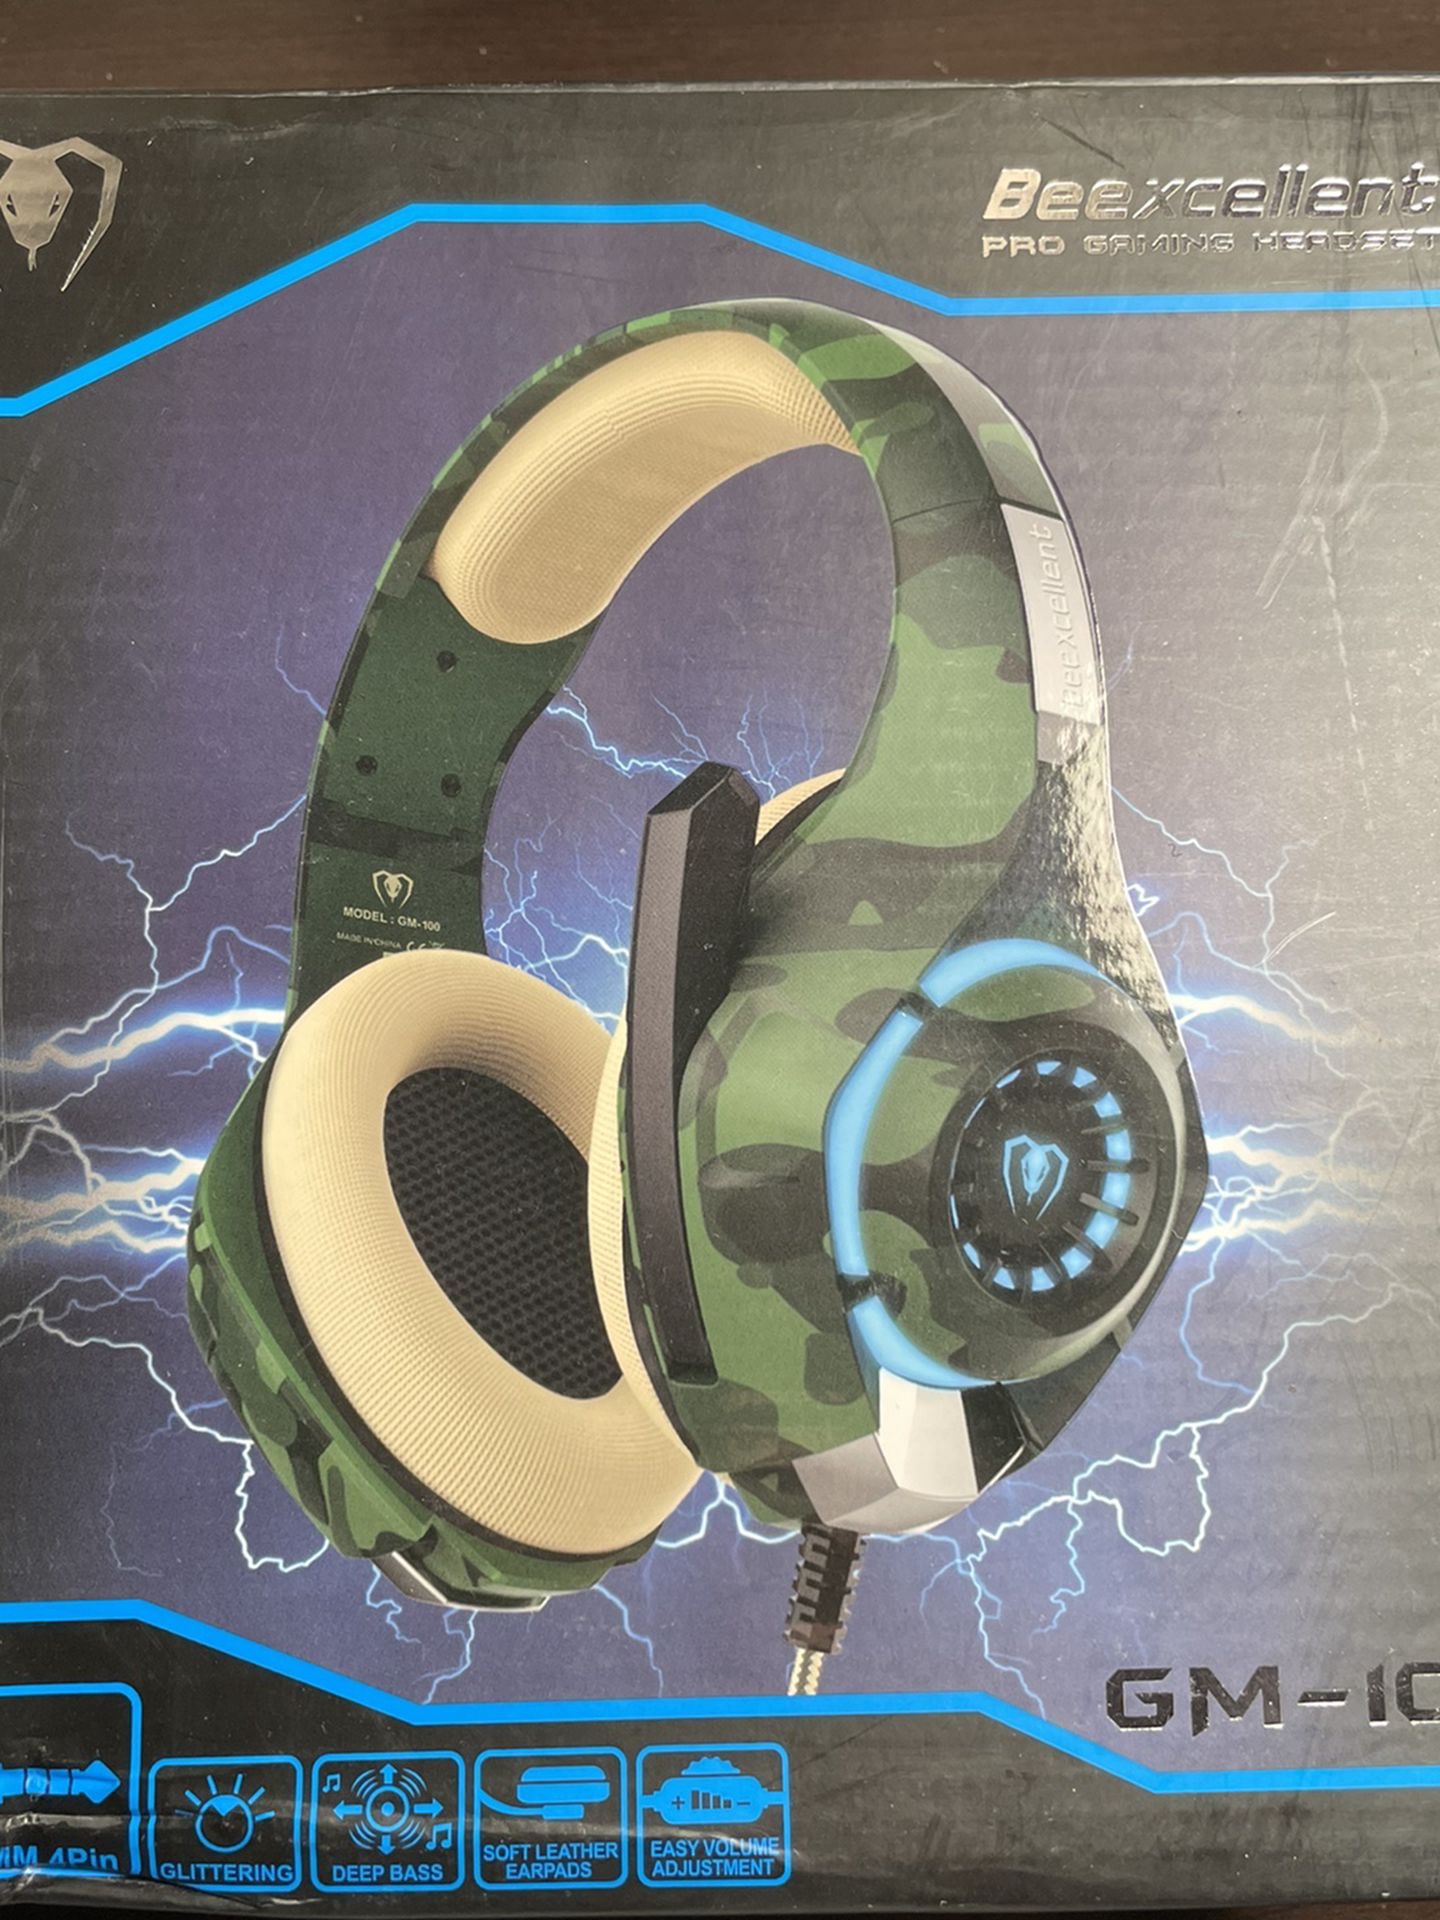 Beexcellent Pro Gaming Headset (GM-100)